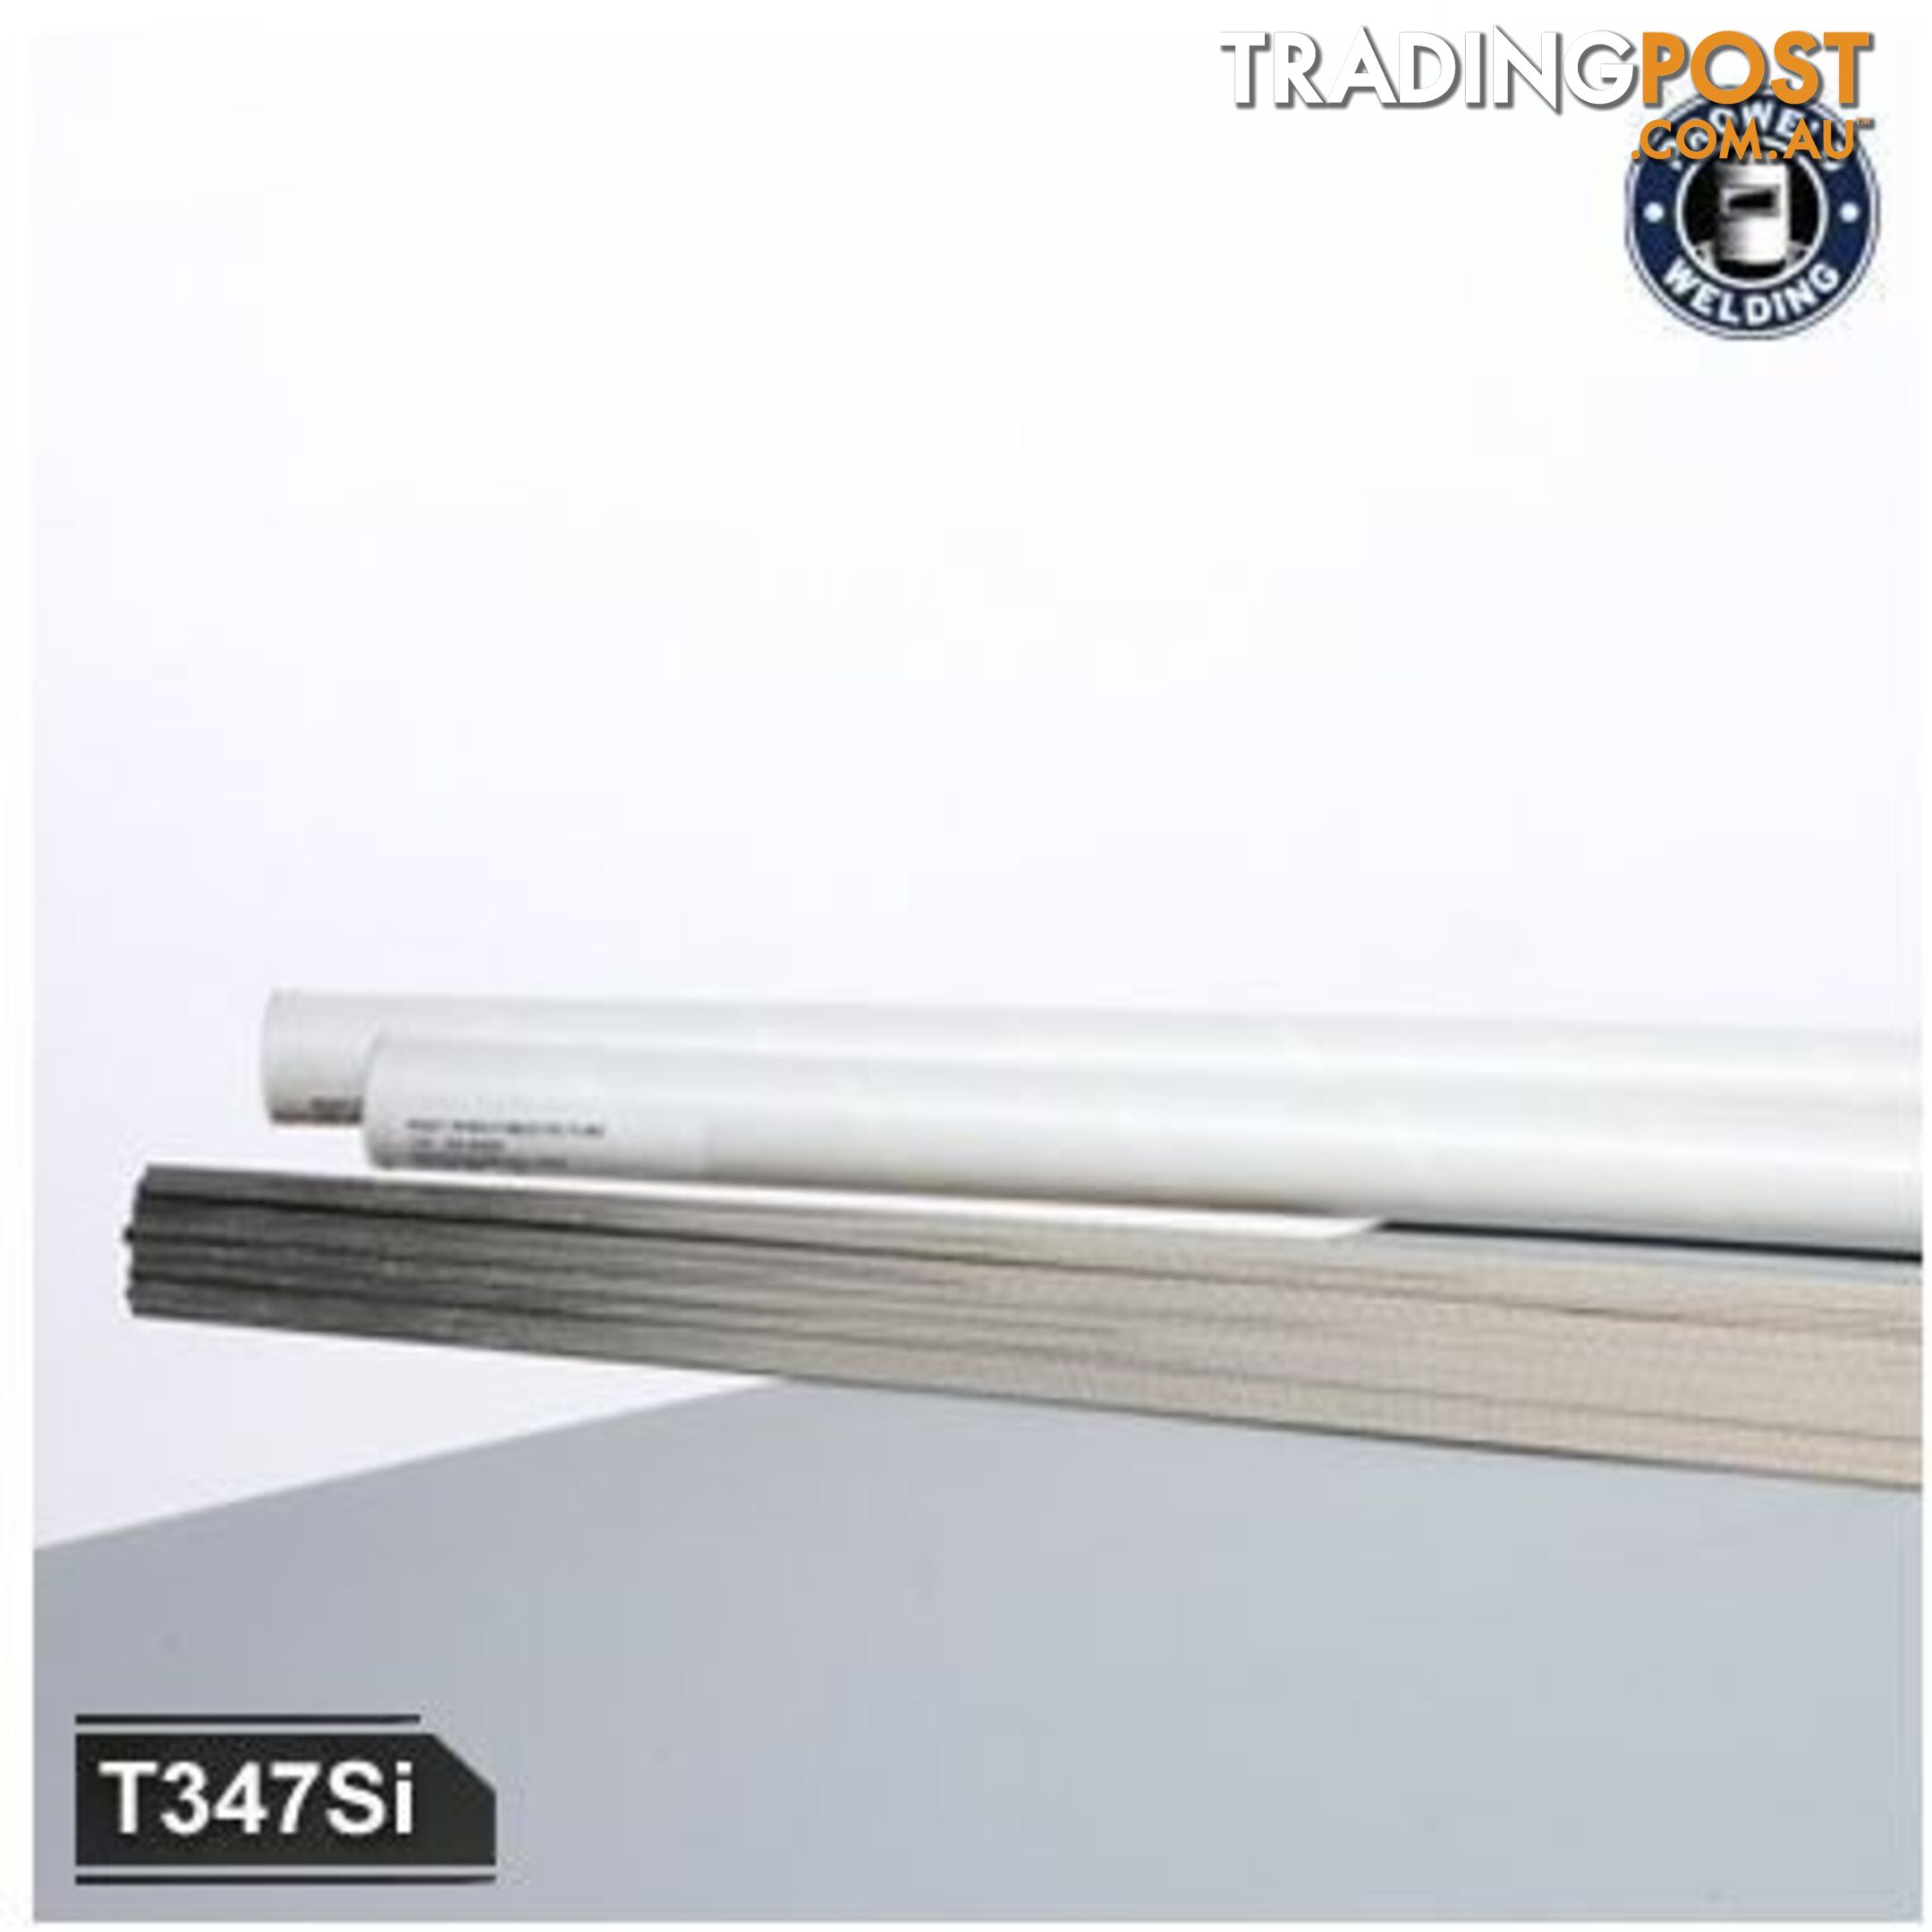 374Si Stainless Steel Tig Rod 2.4mm 5Kg Pack T347Si24S